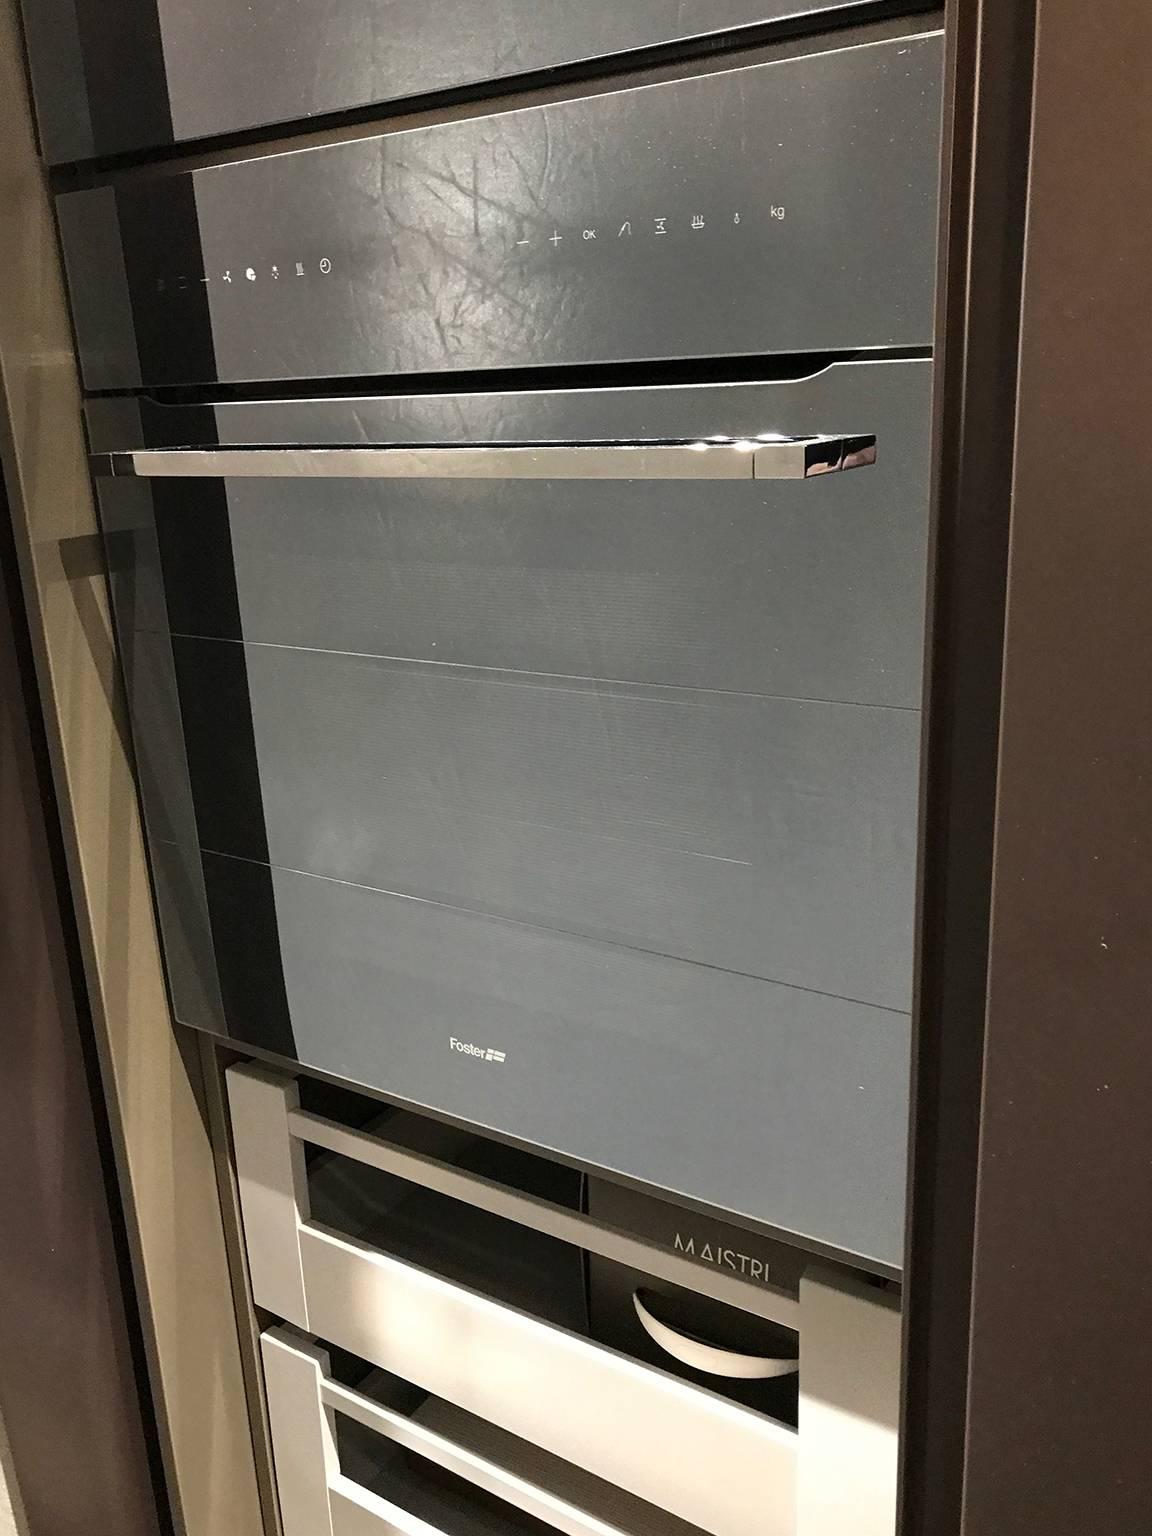 Viva Kitchen Pantry with Sink, Refrigerator, Oven & Cabinets by Alberto Minotti In Good Condition For Sale In Brooklyn, NY